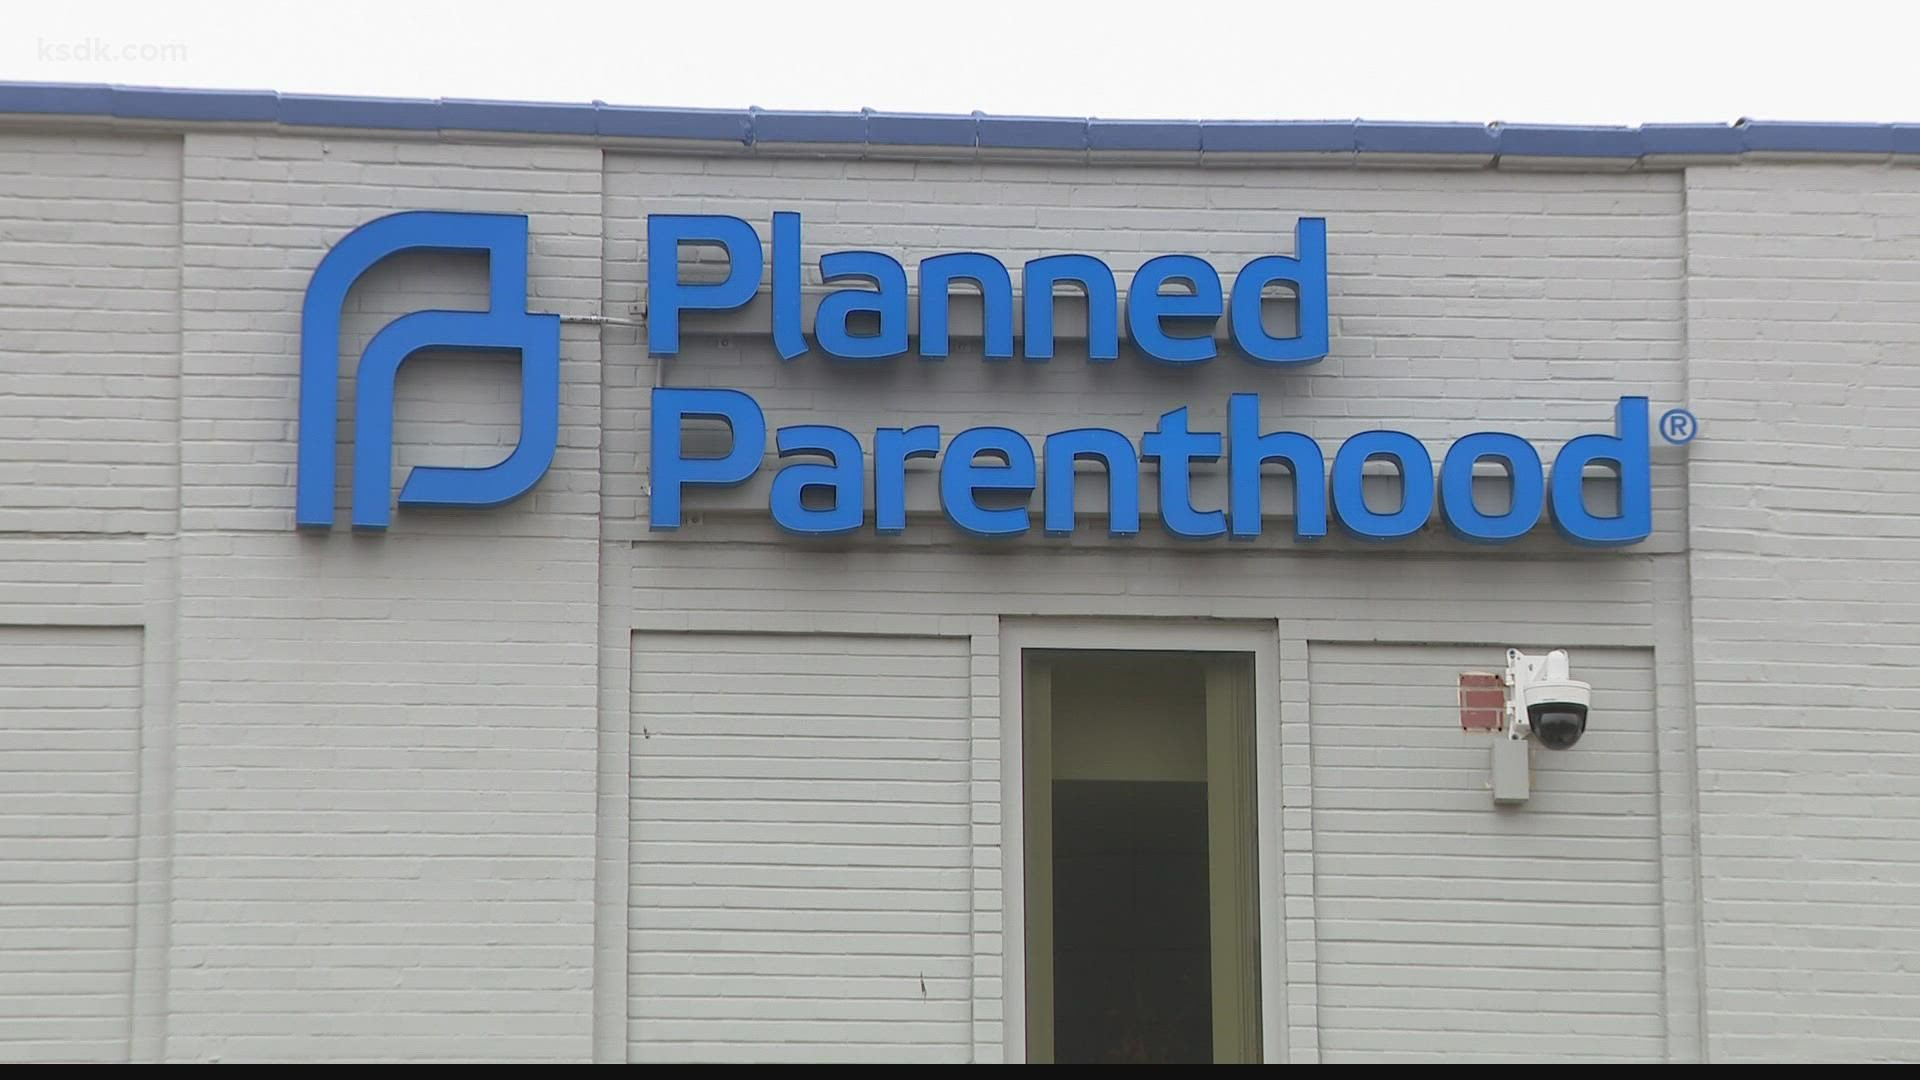 Planned Parenthood said their Metro East clinic would see about 14,000 more patients, while abortion access opponents said they'd stay committed to changing hearts.